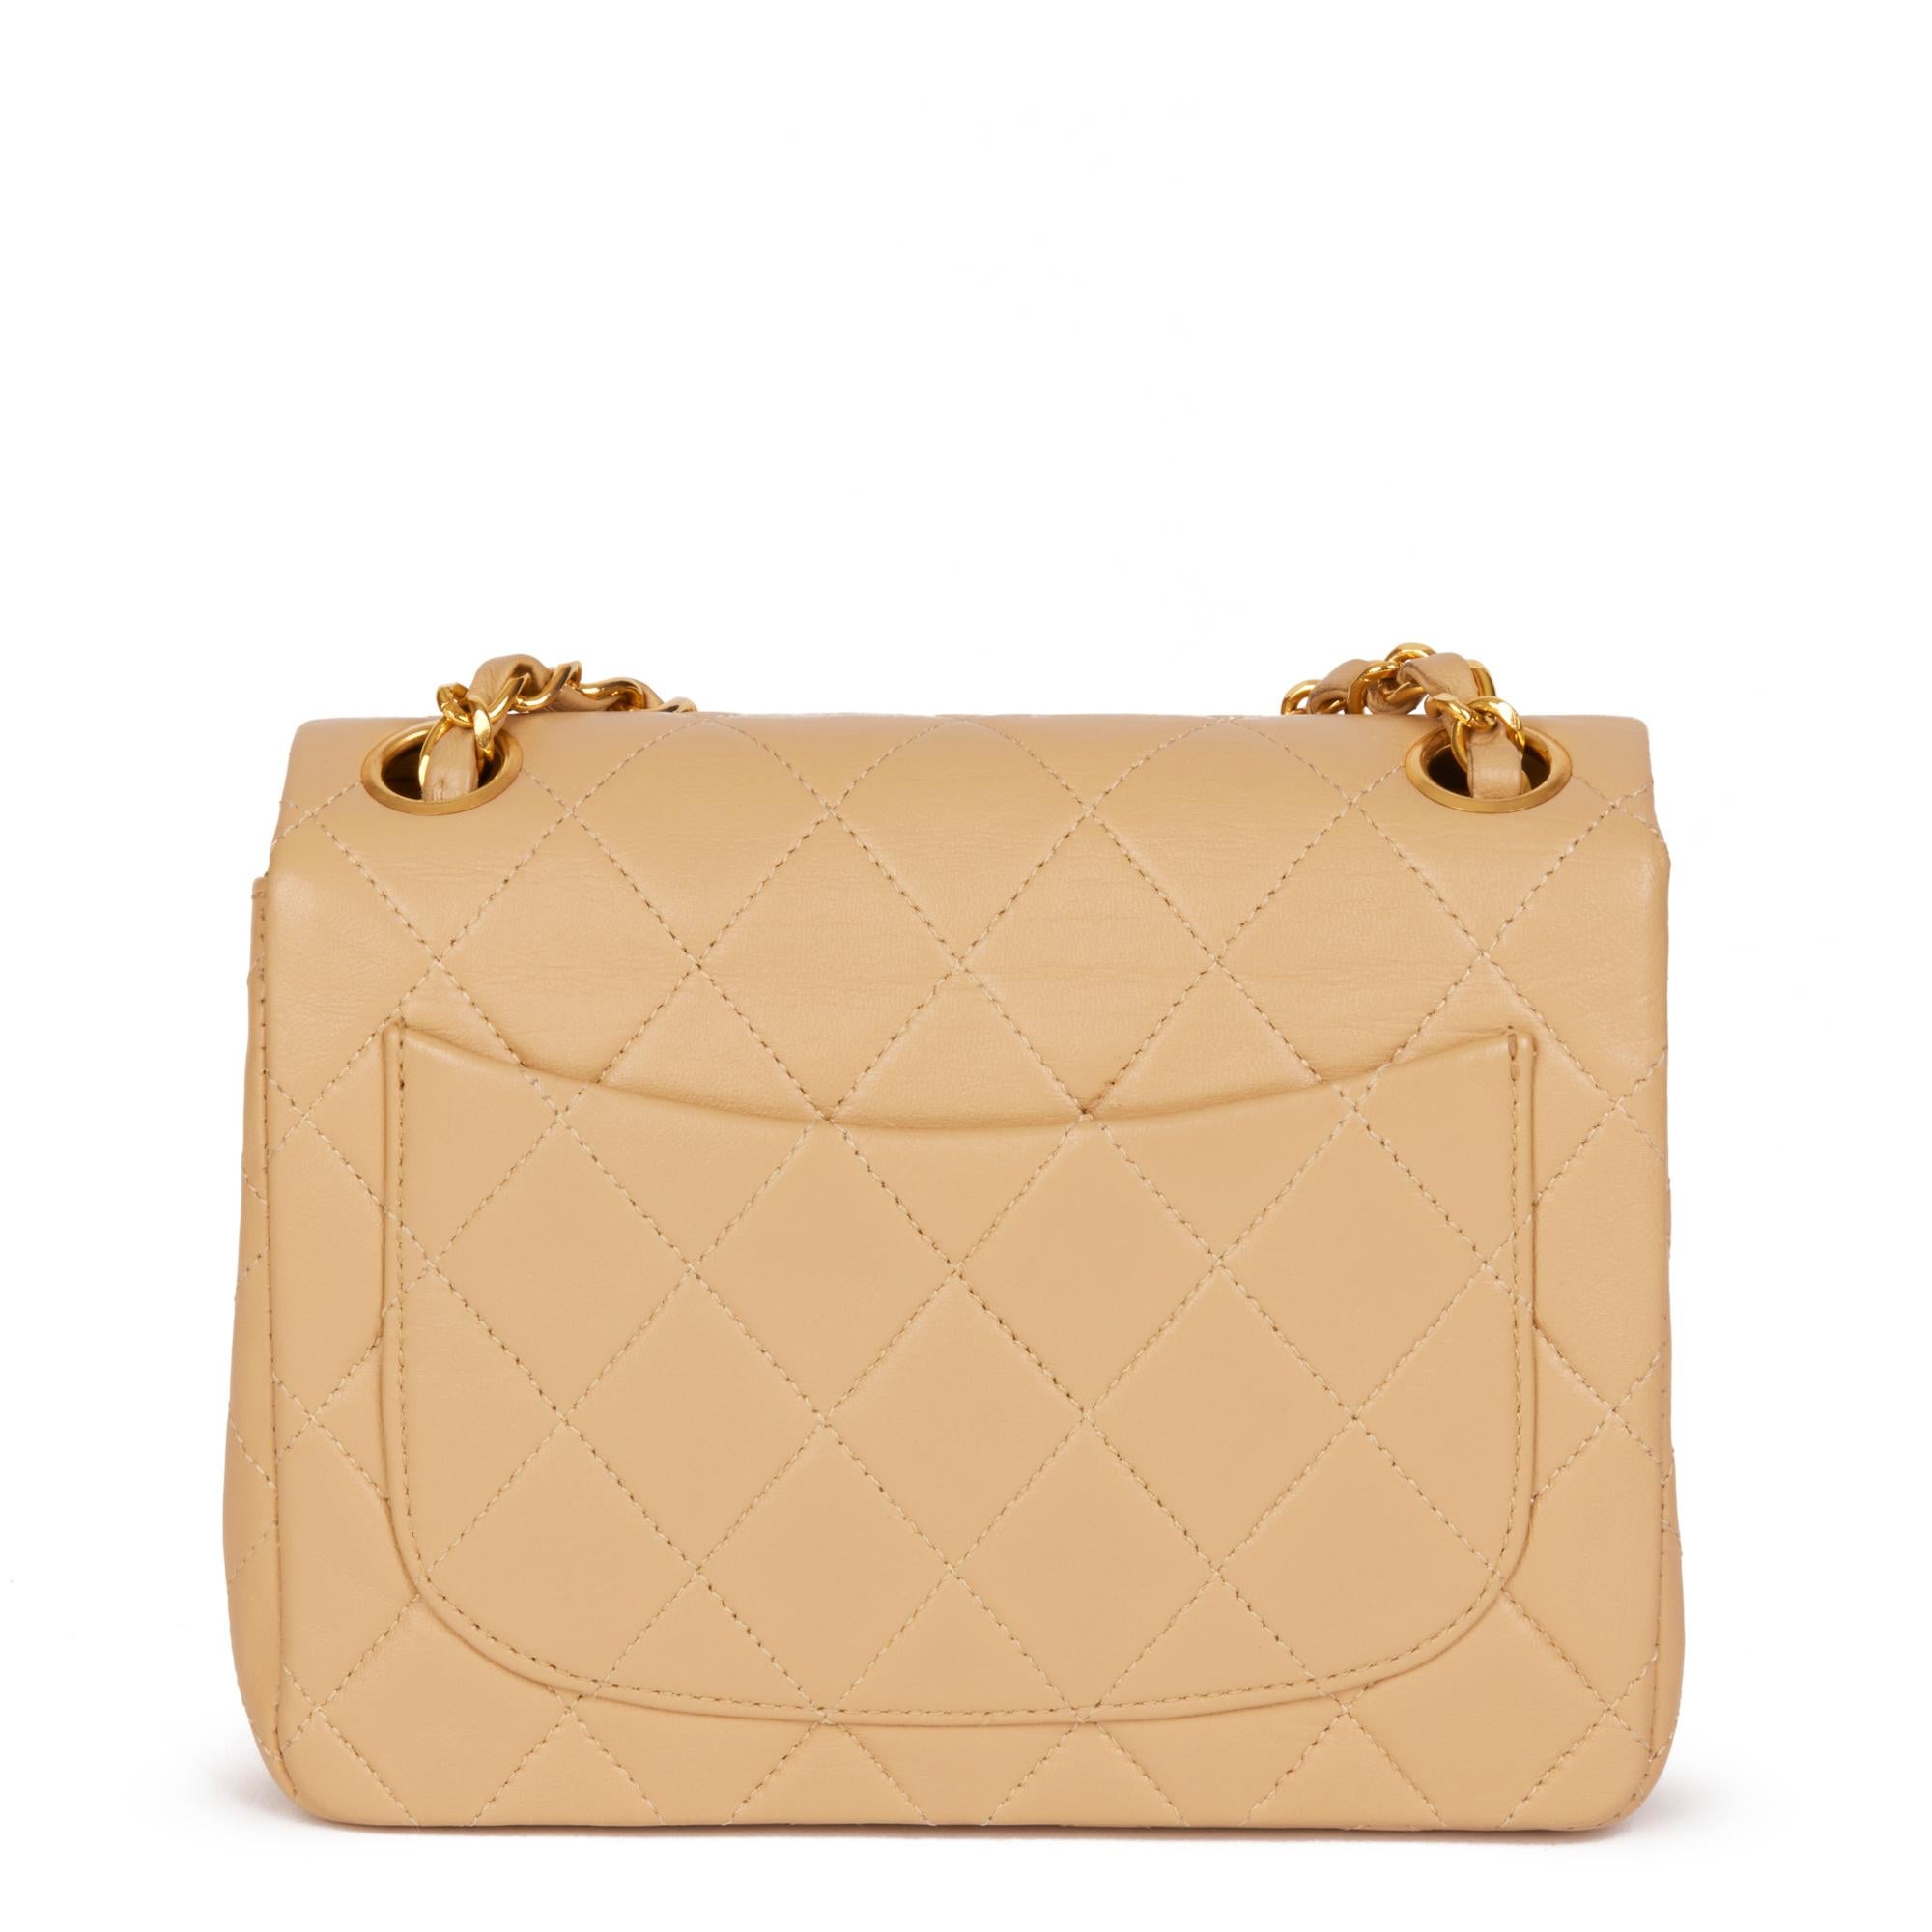 CHANEL Beige Quilted Lambskin Vintage Mini Flap Bag 1